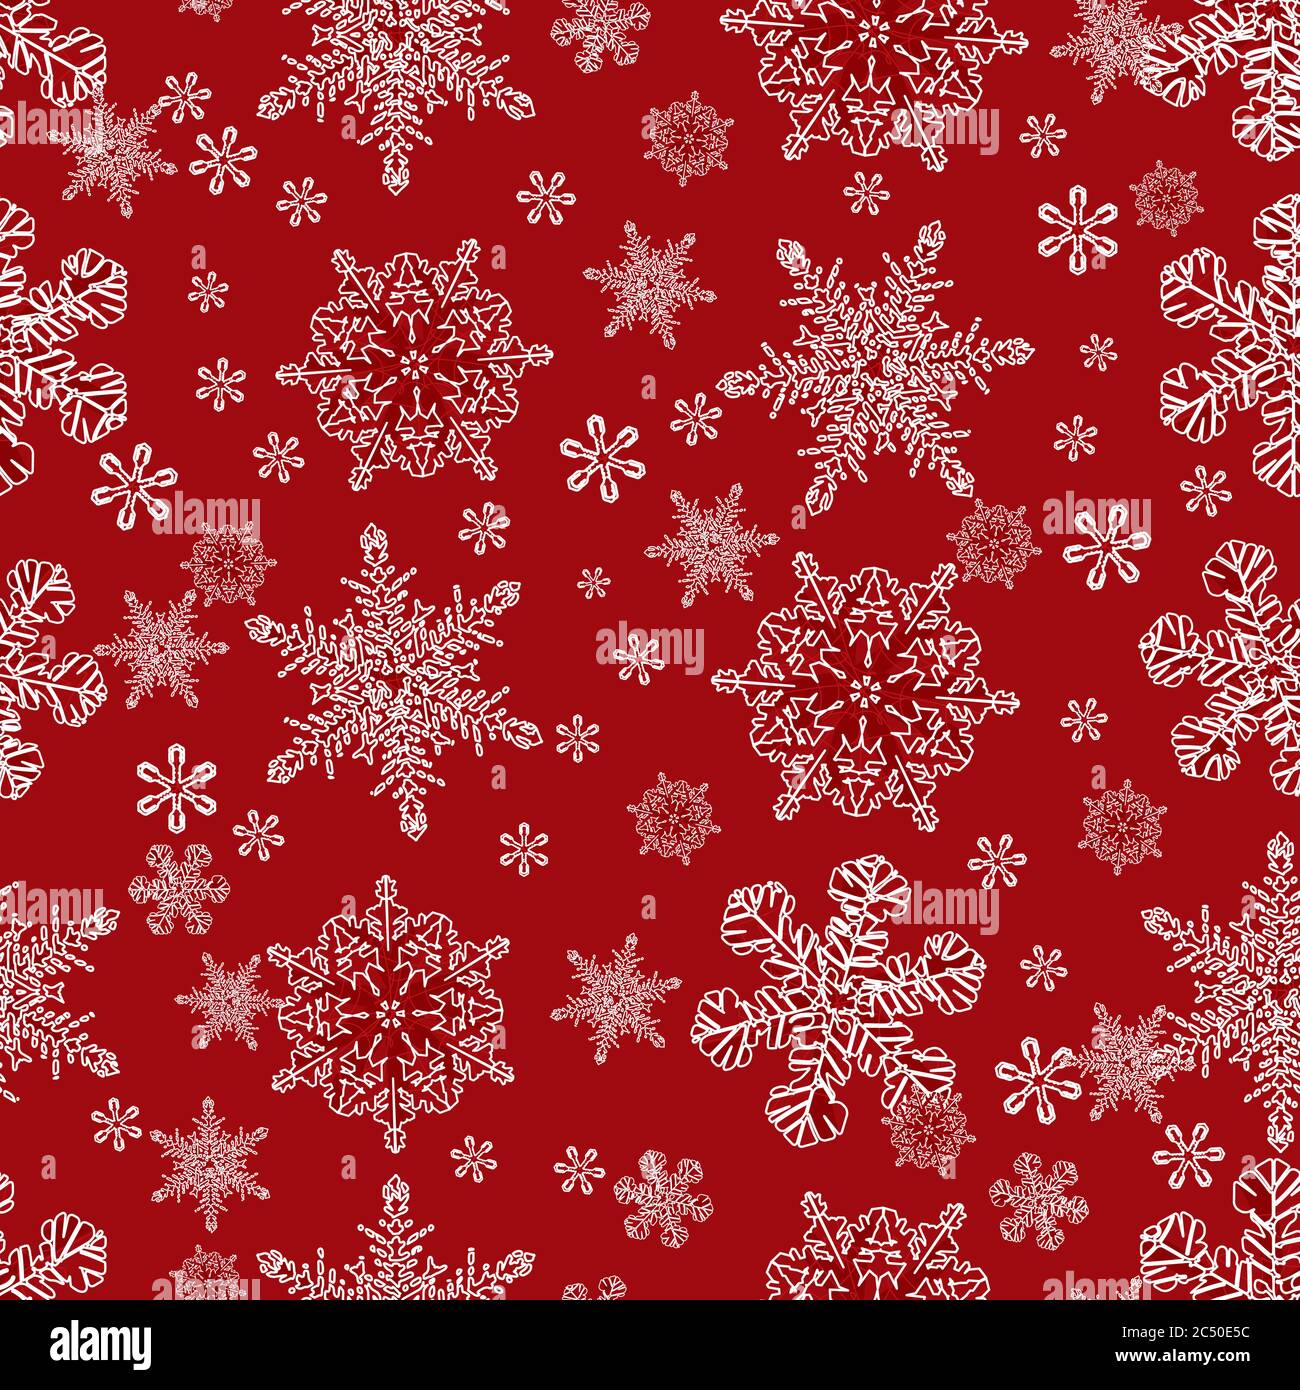 Vector red monochrome large snowflakes and scattered small snowflakes seamless background. Suitable for textile, gift wrap and wallpaper. Stock Vector